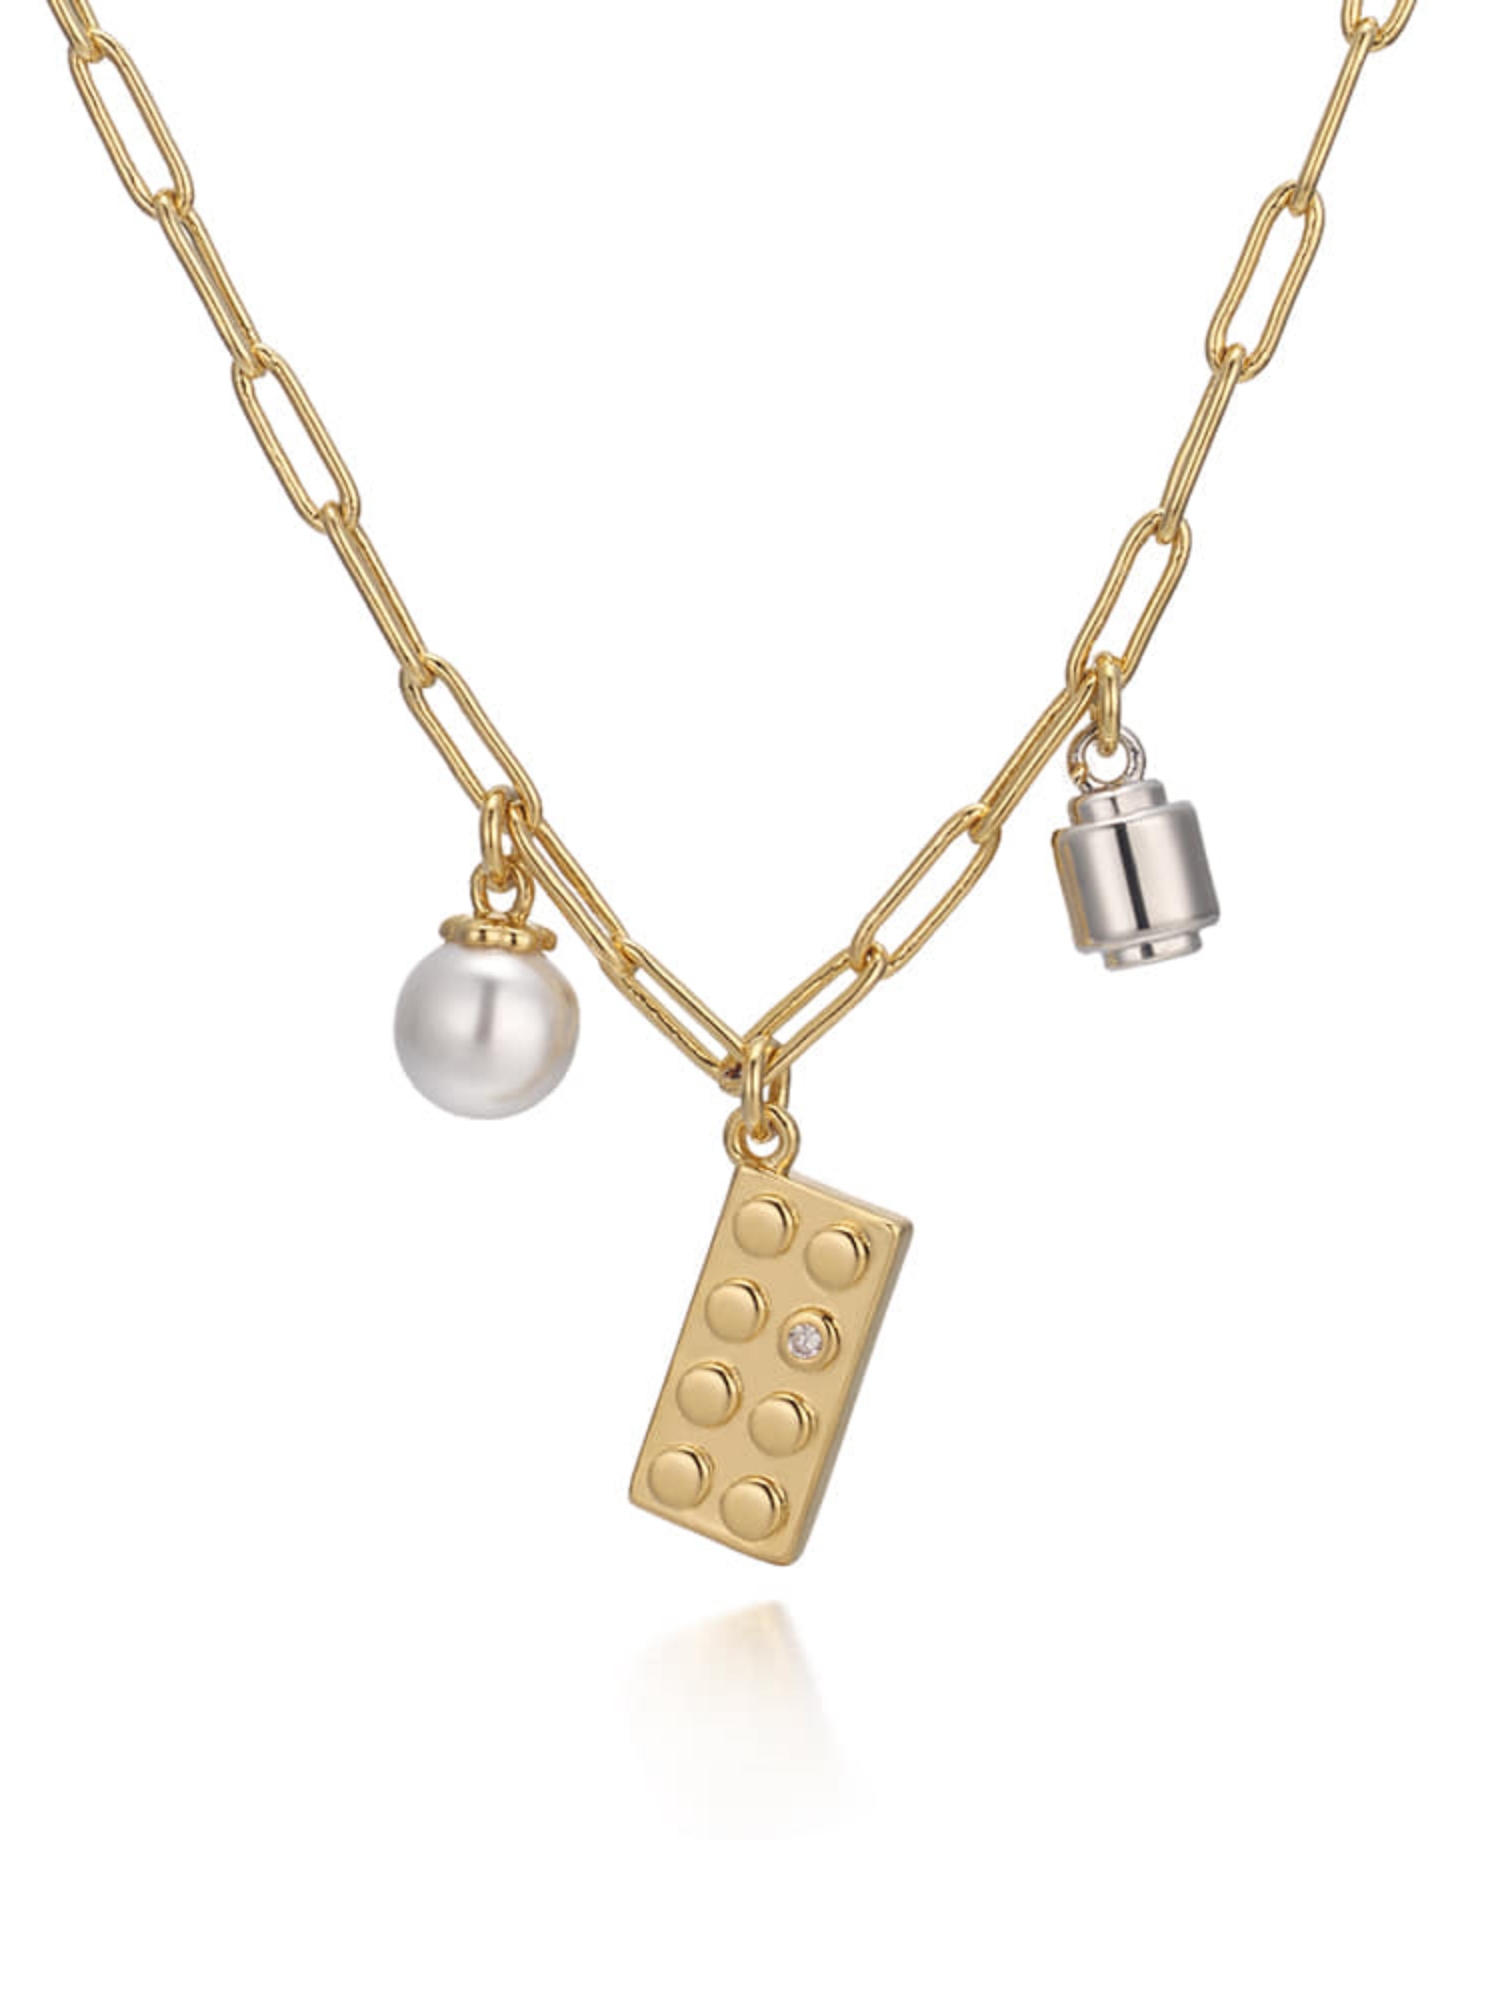 PLAY LEGO Charm Necklace Gold